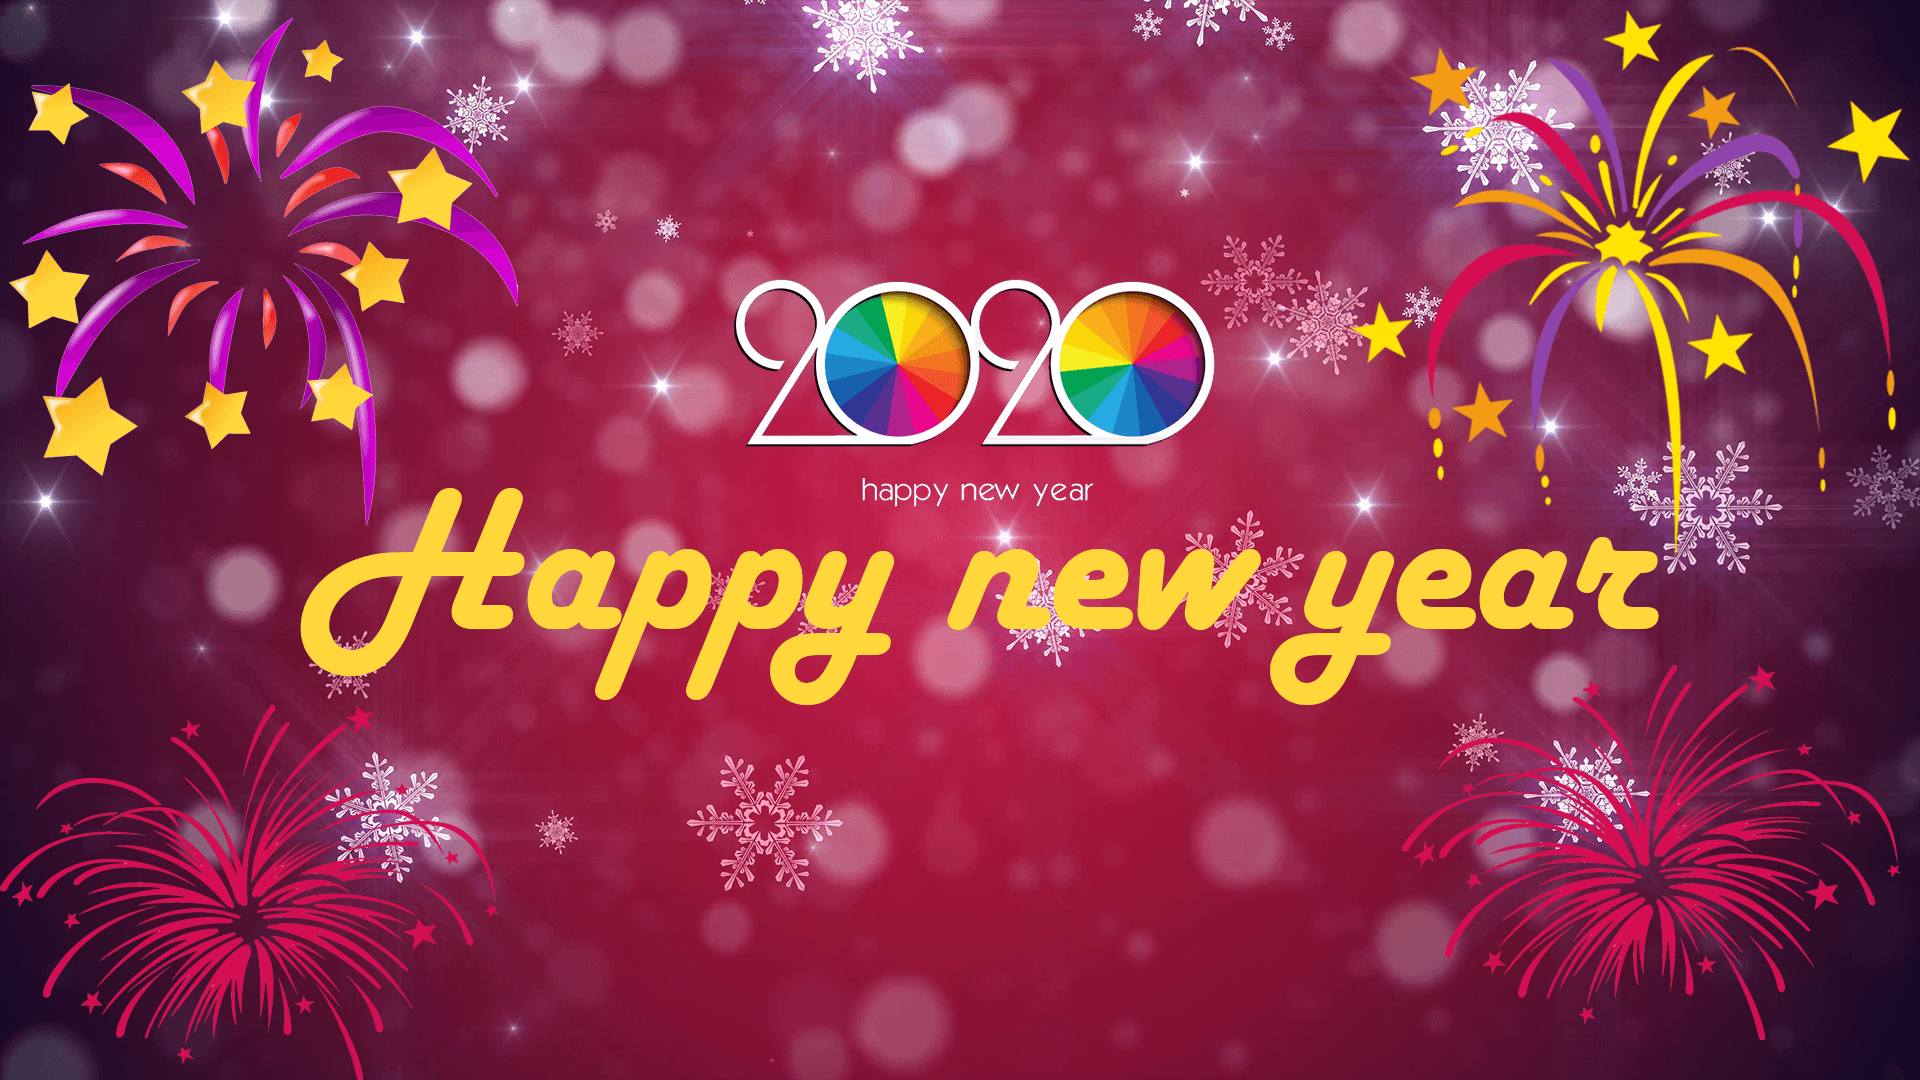 New Year 2020 HD Wallpaper. Background Imagex1080